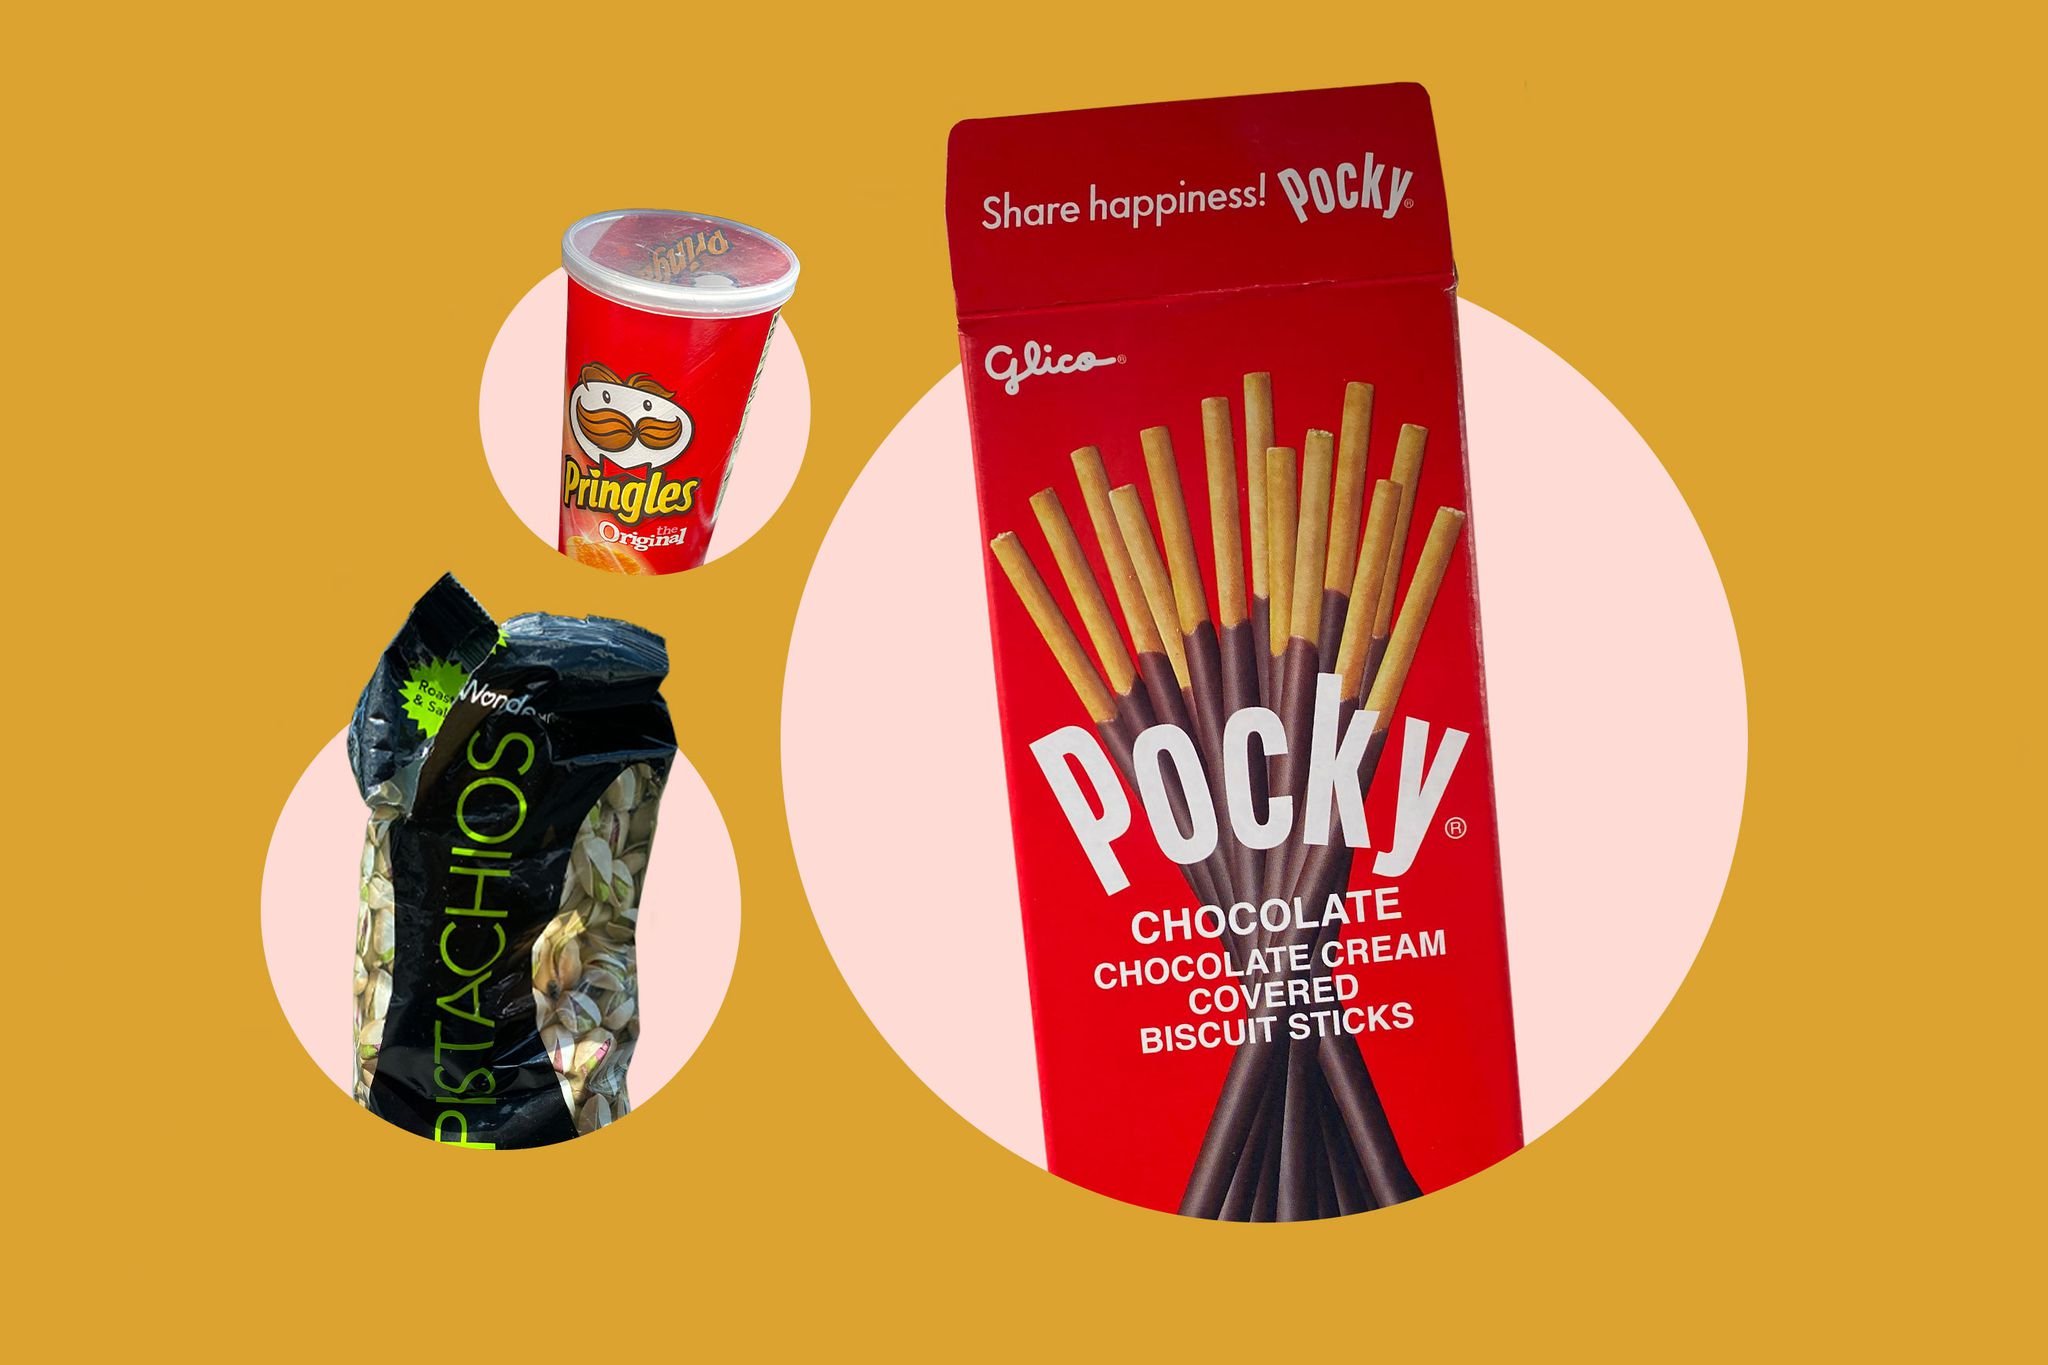 A definitive ranking of the 16 best road trip snacks of all time